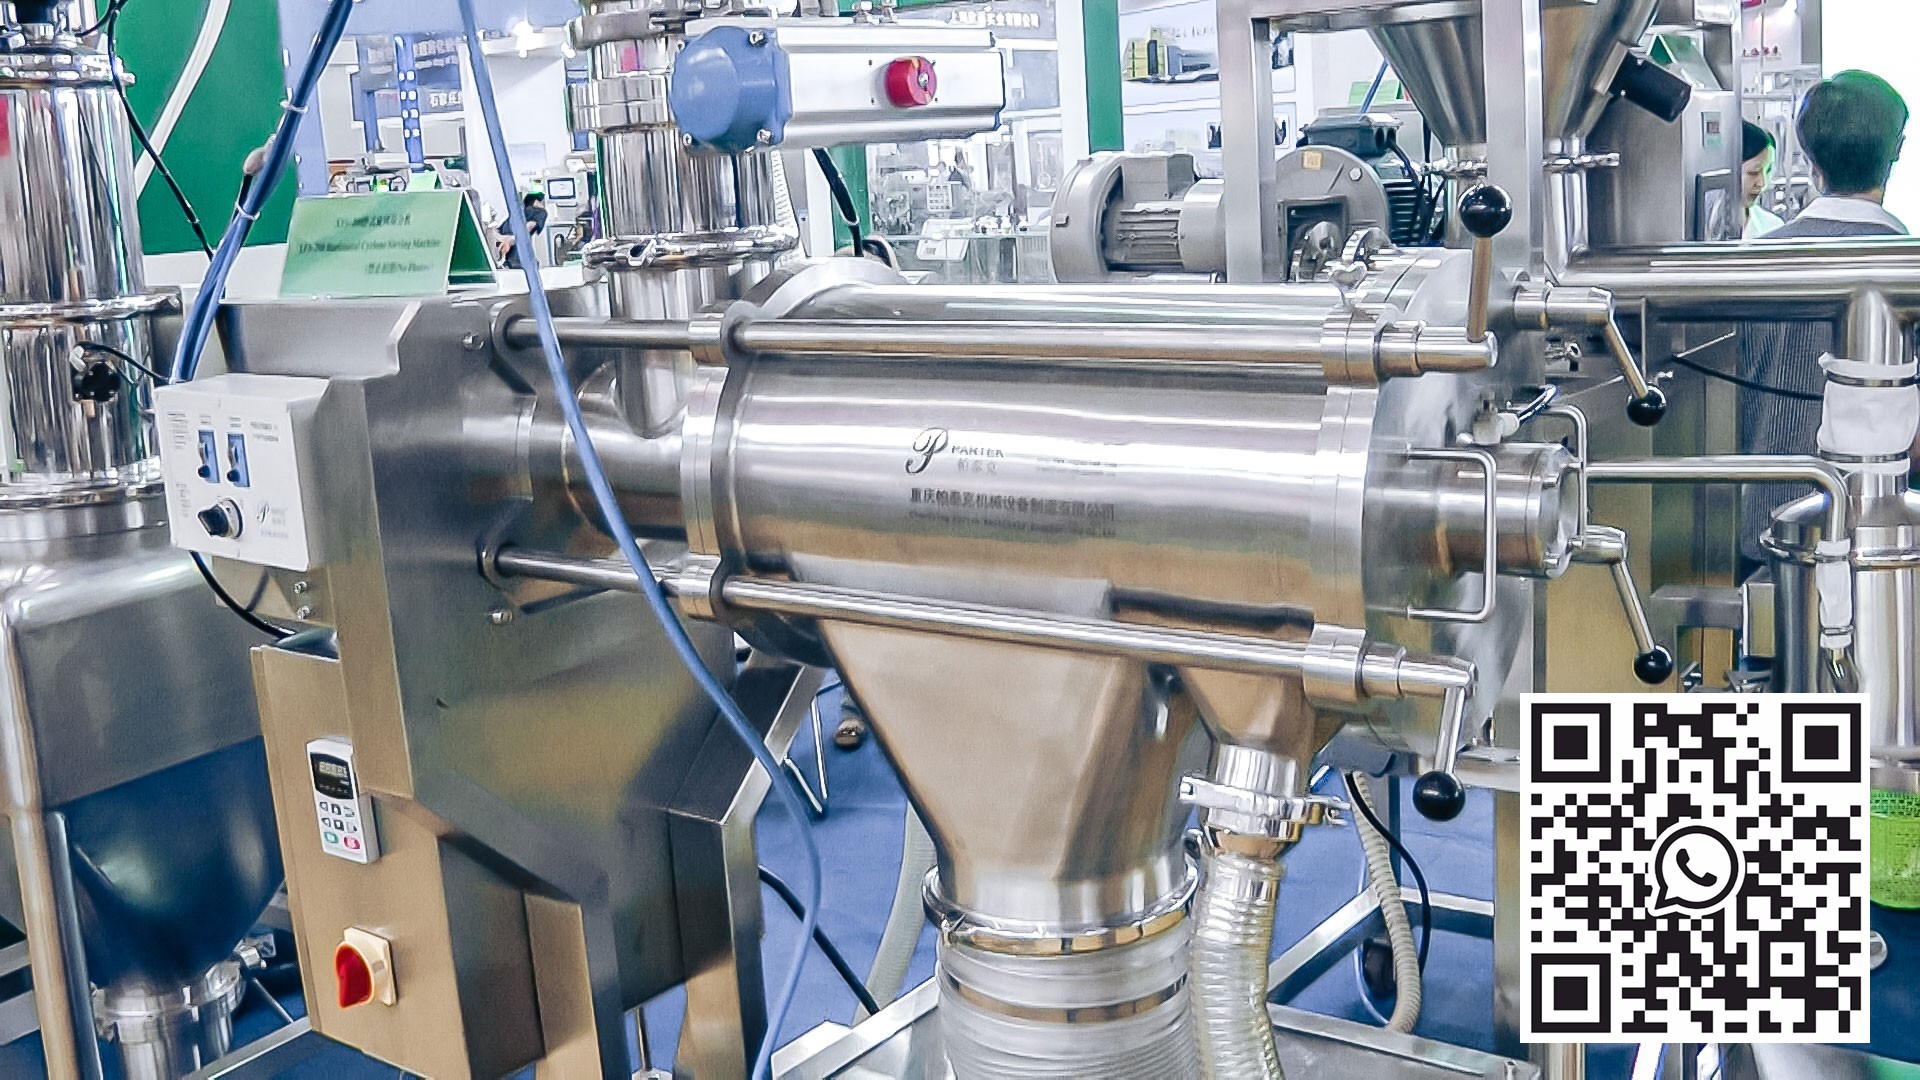 Automatic equipment for preparation and mixing of powders in pharmaceutical production Slovakia